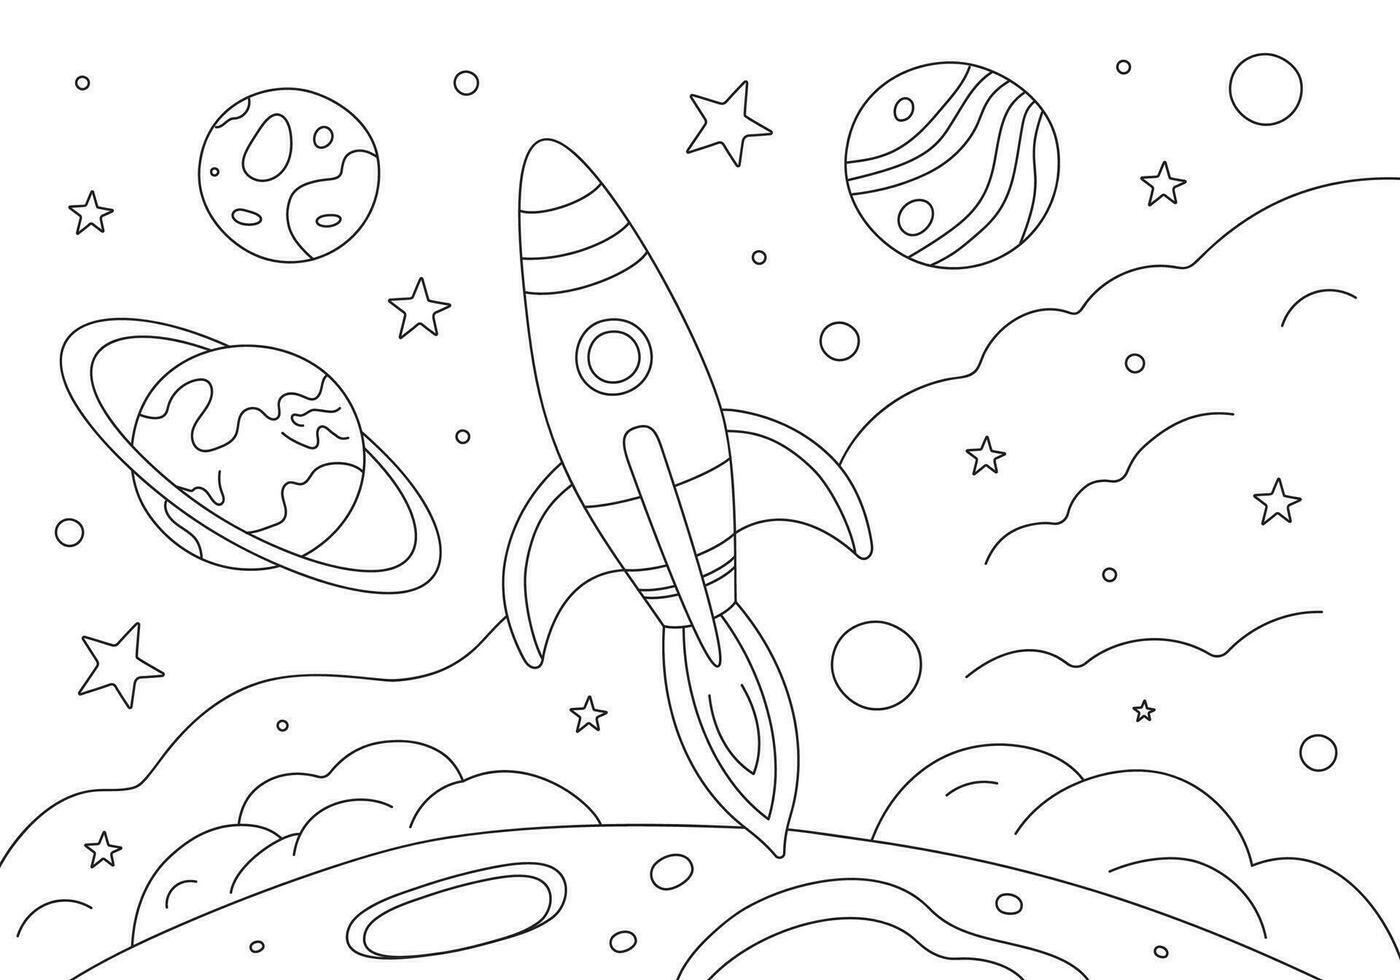 Coloring page with flying rocket and planets in space. Hand drawn vector contoured black and white illustration.